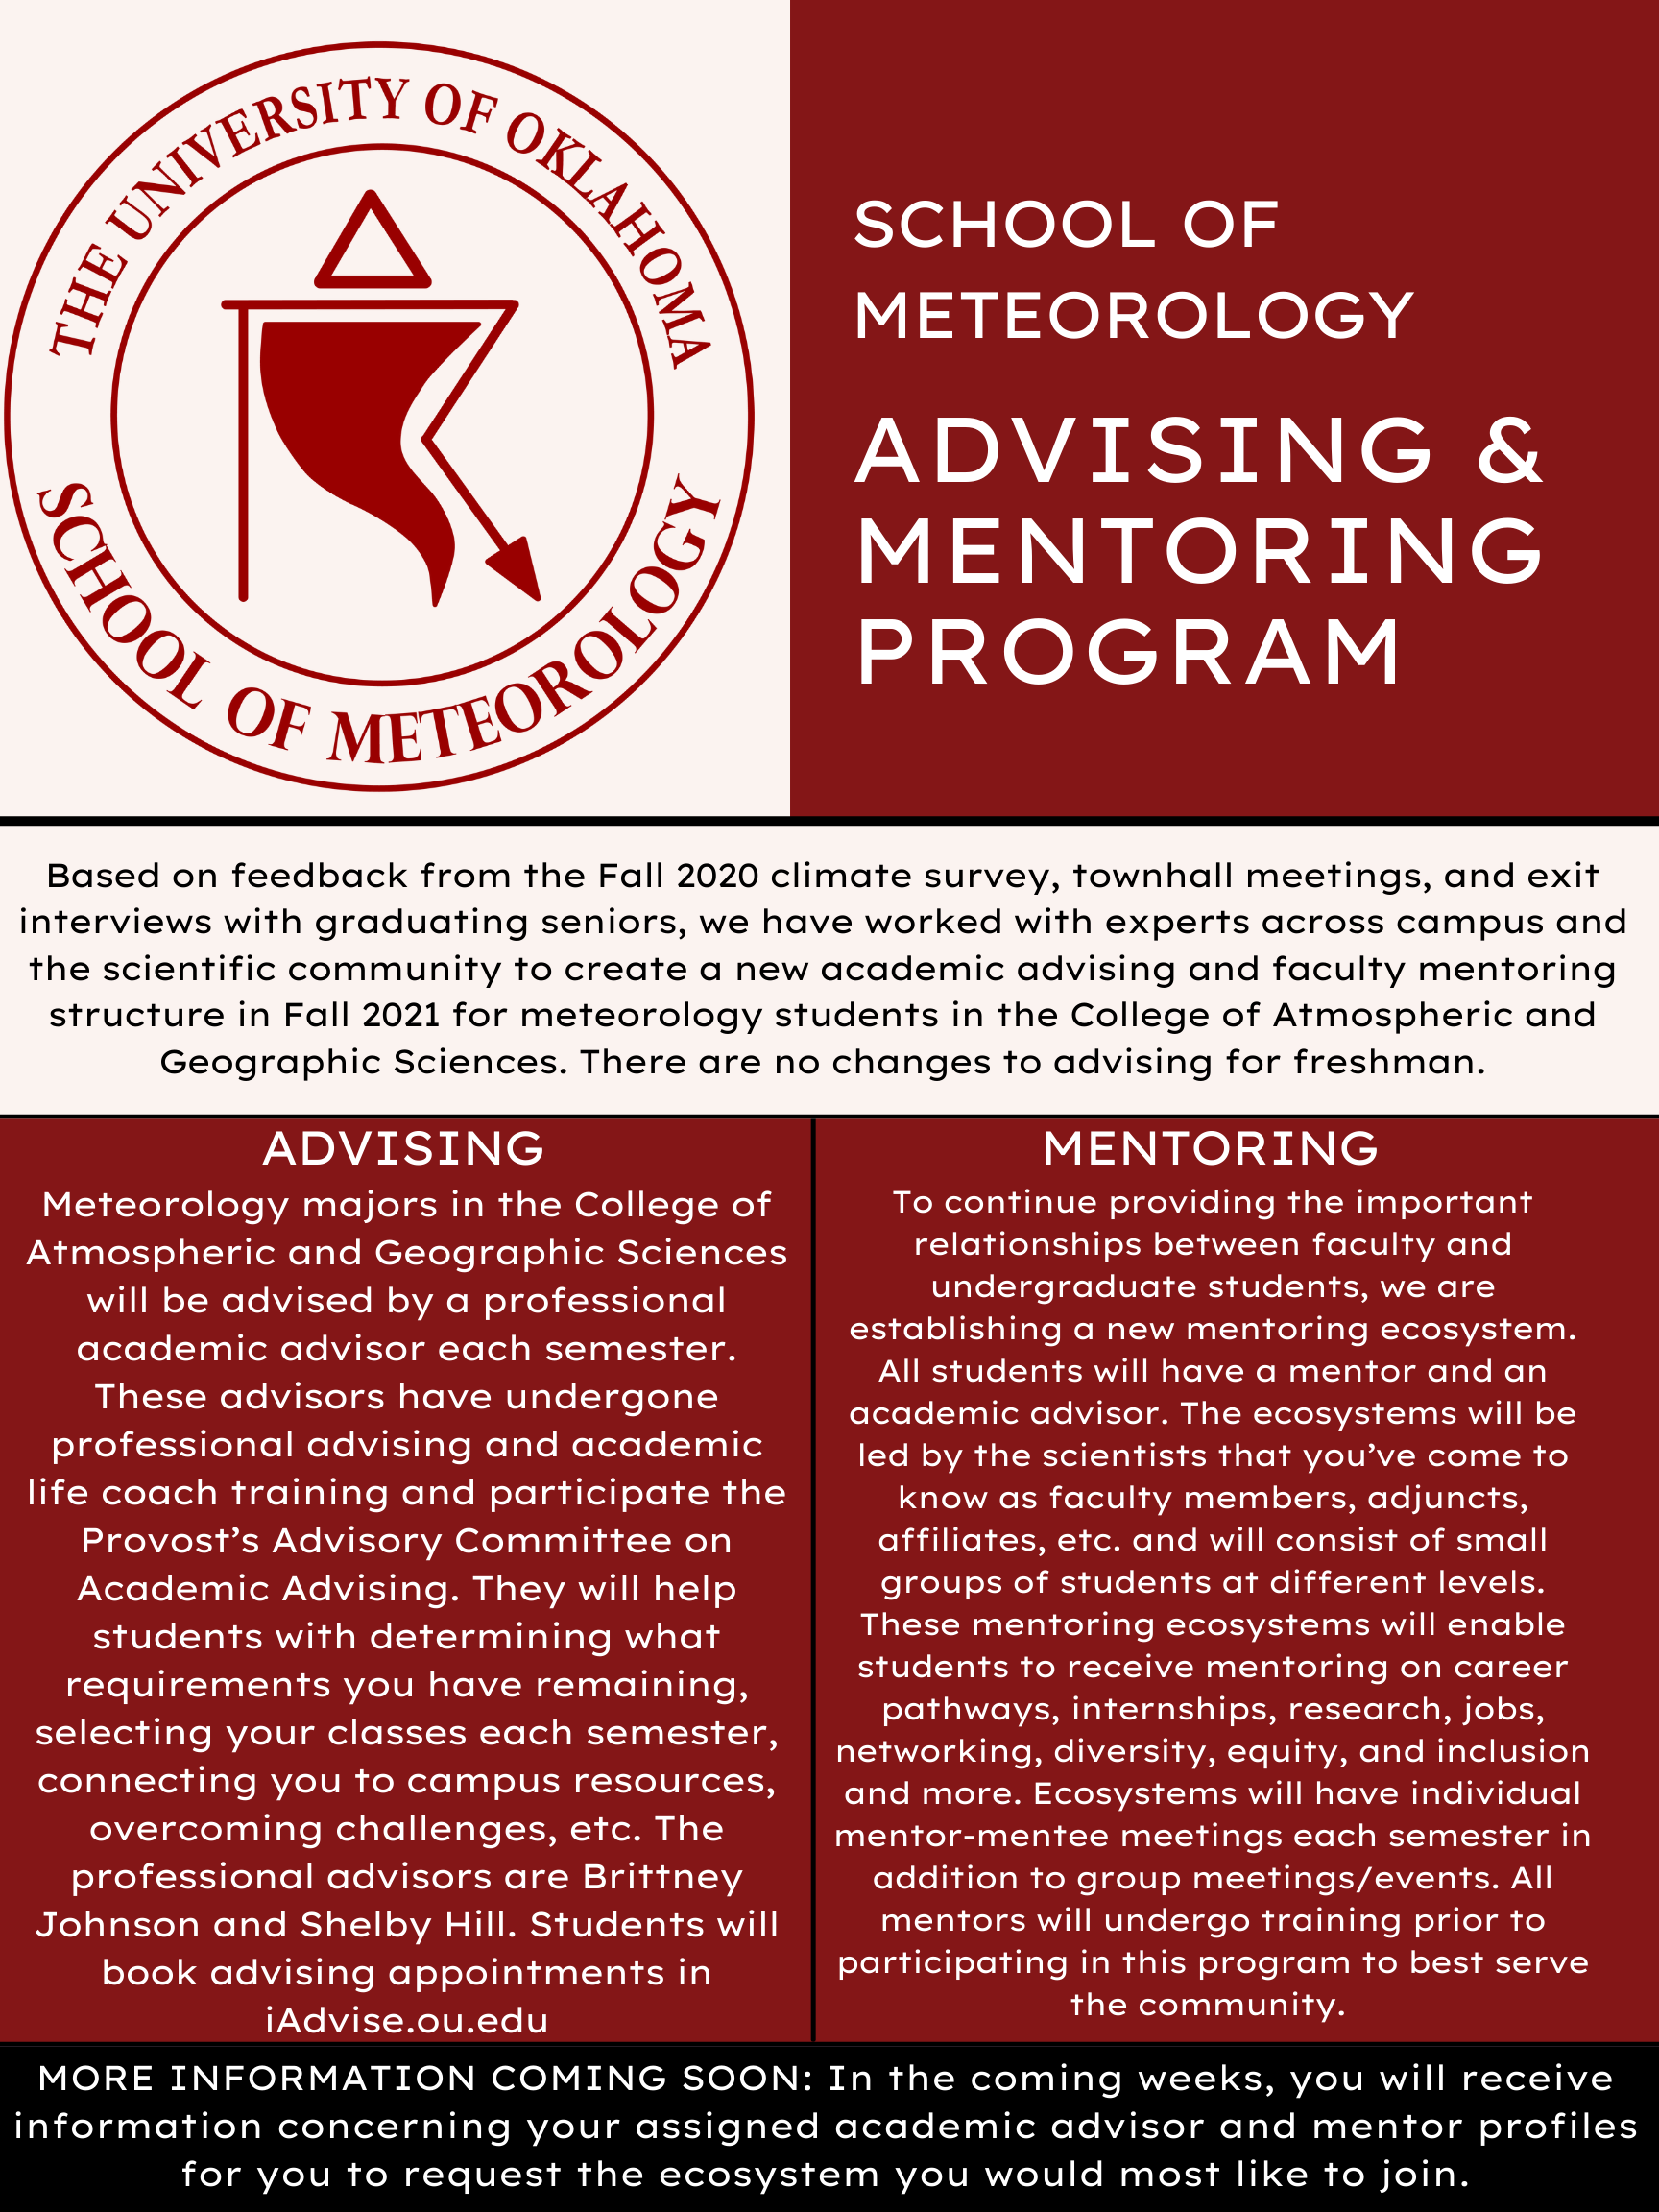 School of Meteorology, Advising and Mentoring Program. The Meteorology advisors are Brittney Johnson and Shelby Hill. Students will book advising appointments in iAdvise.ou.edu. With consideration from previous graduates, SoM will be establishing a new mentoring system. All students will have an academic advisor and a mentor, the mentorship will be from various members of the scientific community, the SoM and the NWC staff. The mentors will opperate in a pod or ecosystem, they will provide mentoring on career pathways, internships, research, jobs, networking, diversity, equity, and inculsion and much more! All Mentors will under-go training prior to the release of the program to prepare themselves to be equipped to serve the community. There will be no changing to the advisement of Freshman level students. MORE INFORMATION COMING SOON: In the coming weeks you will receive information concerning your assigned academic advisor and mentor profiles for you to request the ecosystem you would most like to join. 